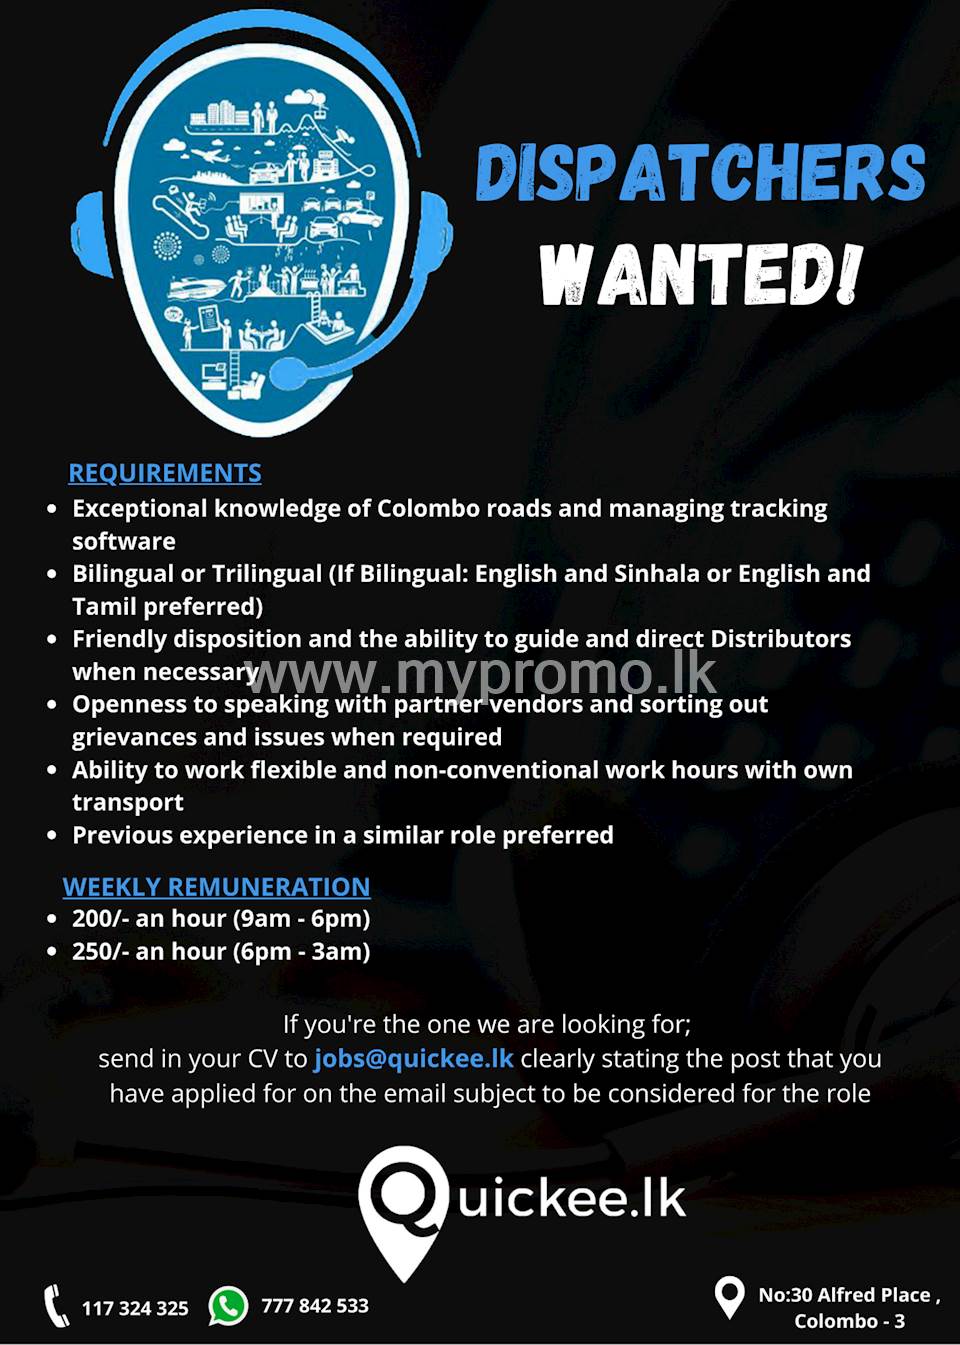 DISPATCHERS WANTED!